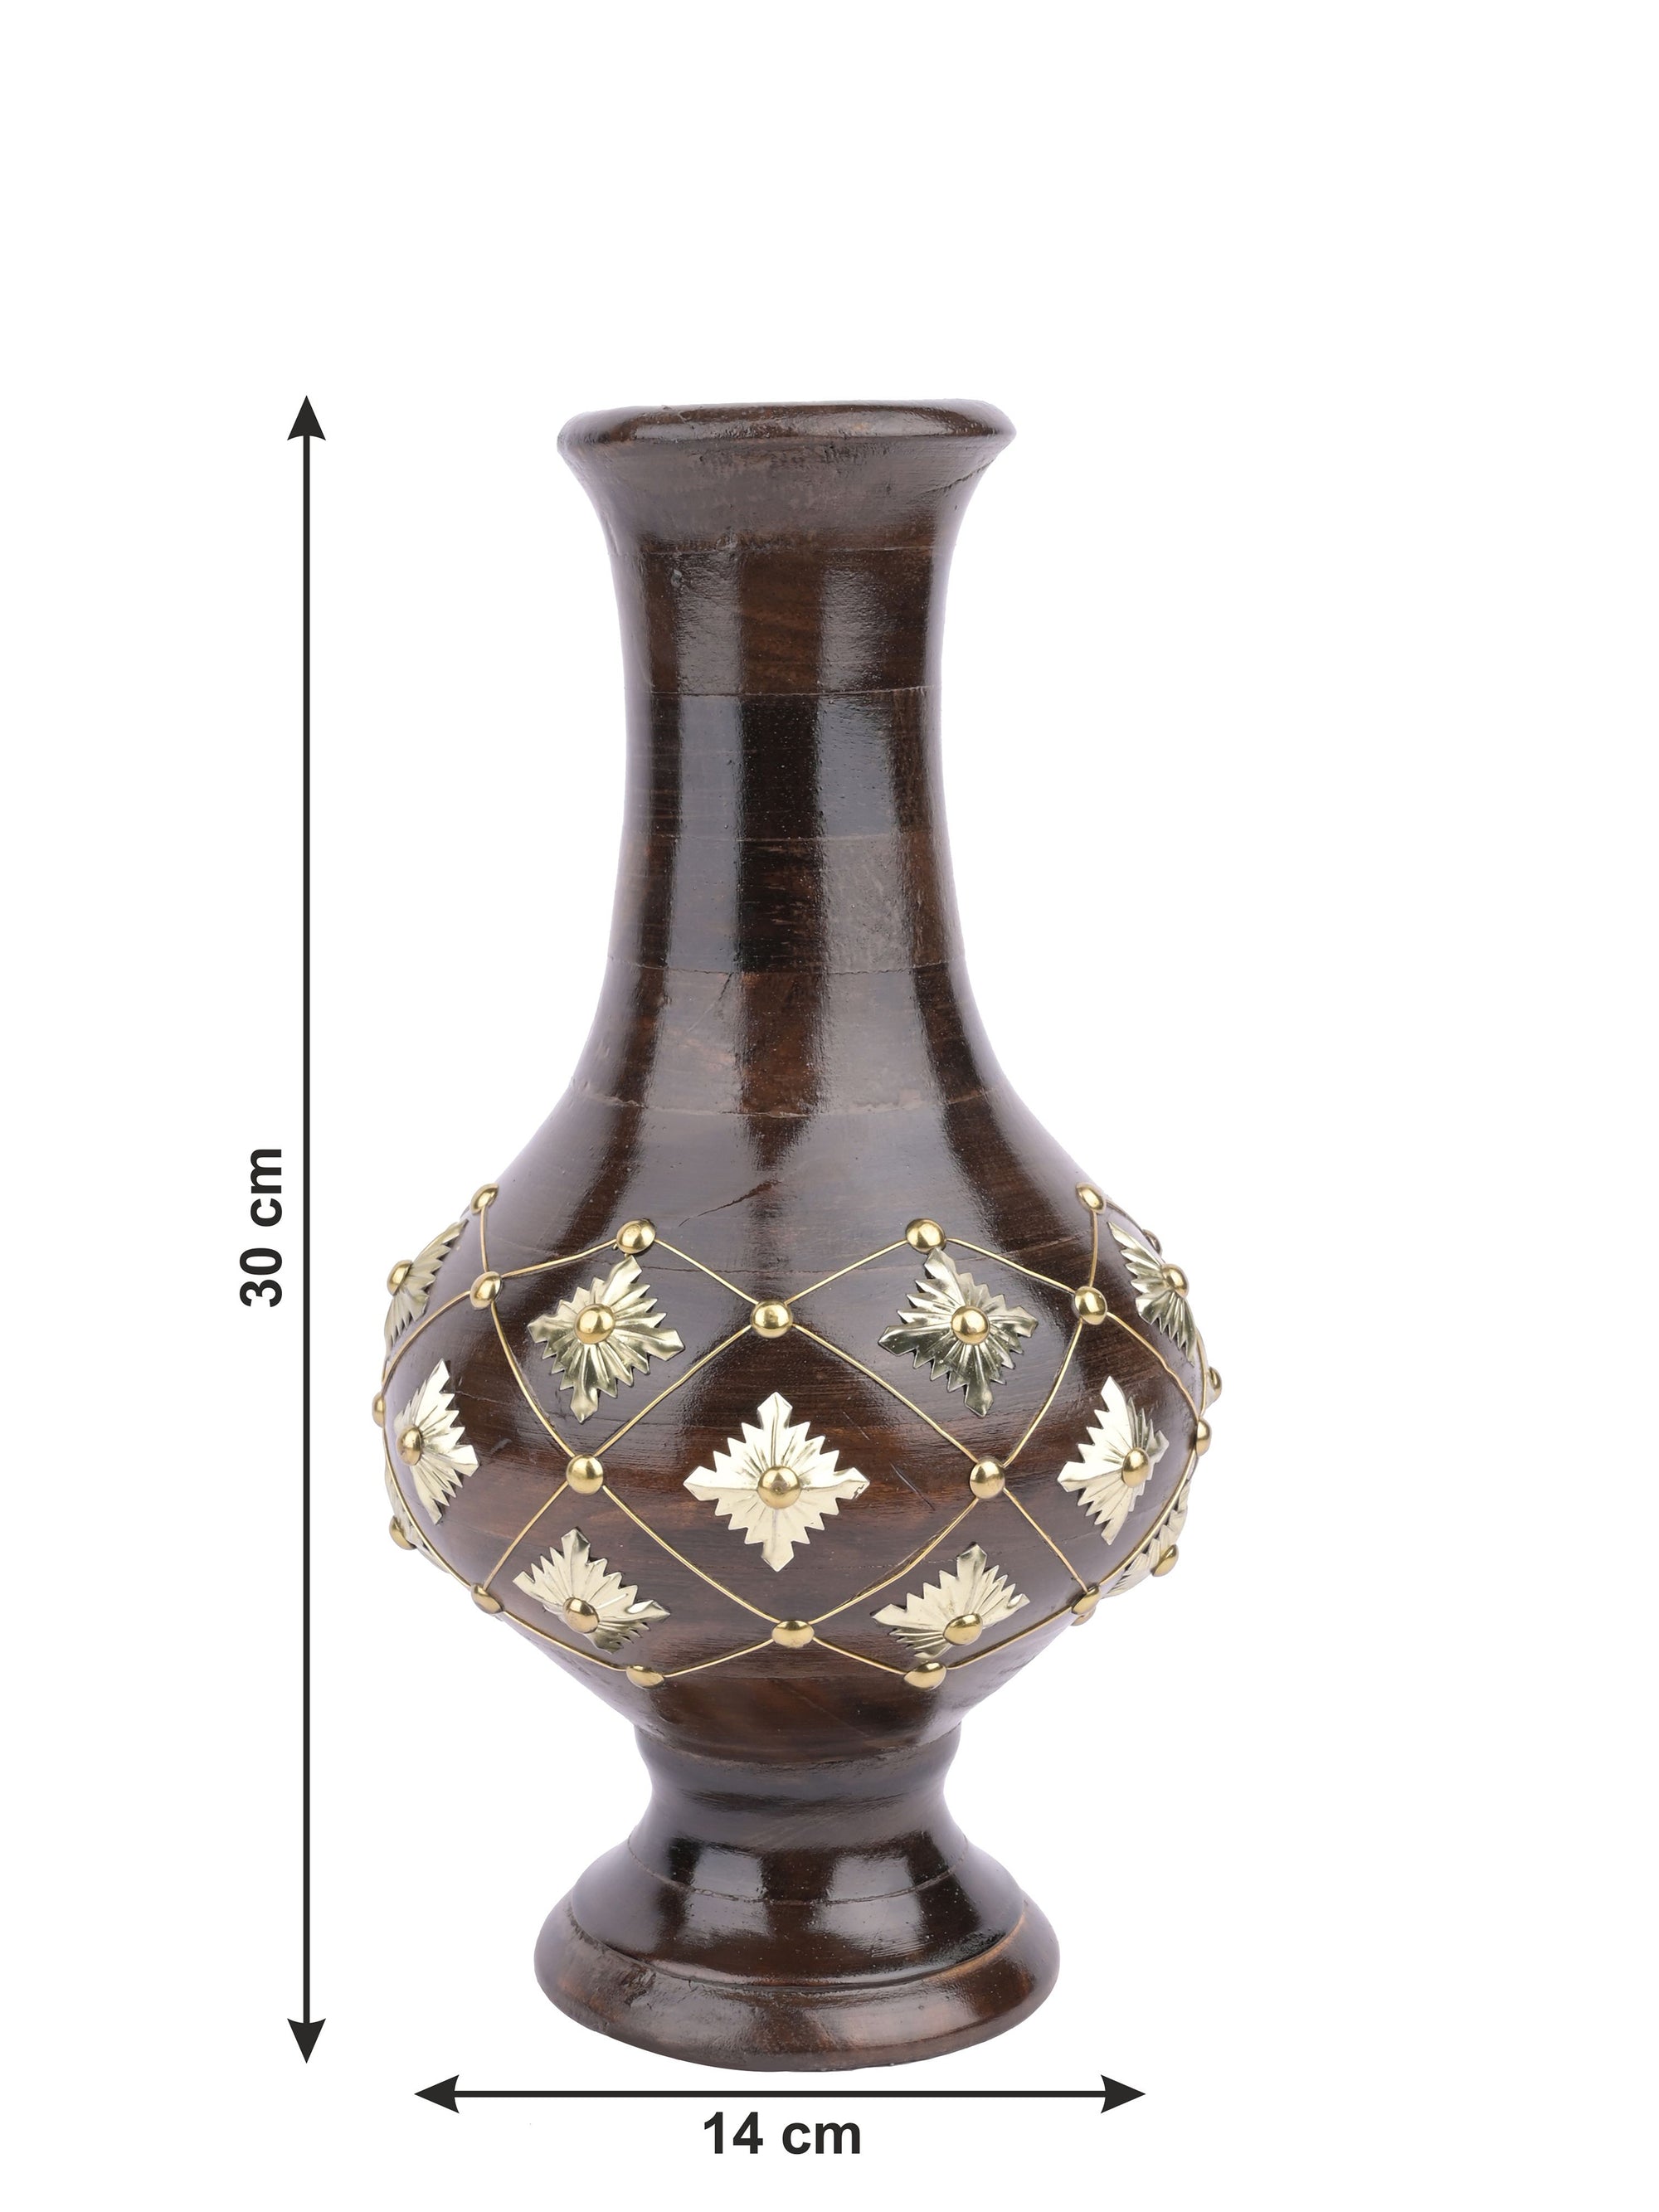 Wooden flower vase with brass decoration - 12 inches in height - The Heritage Artifacts